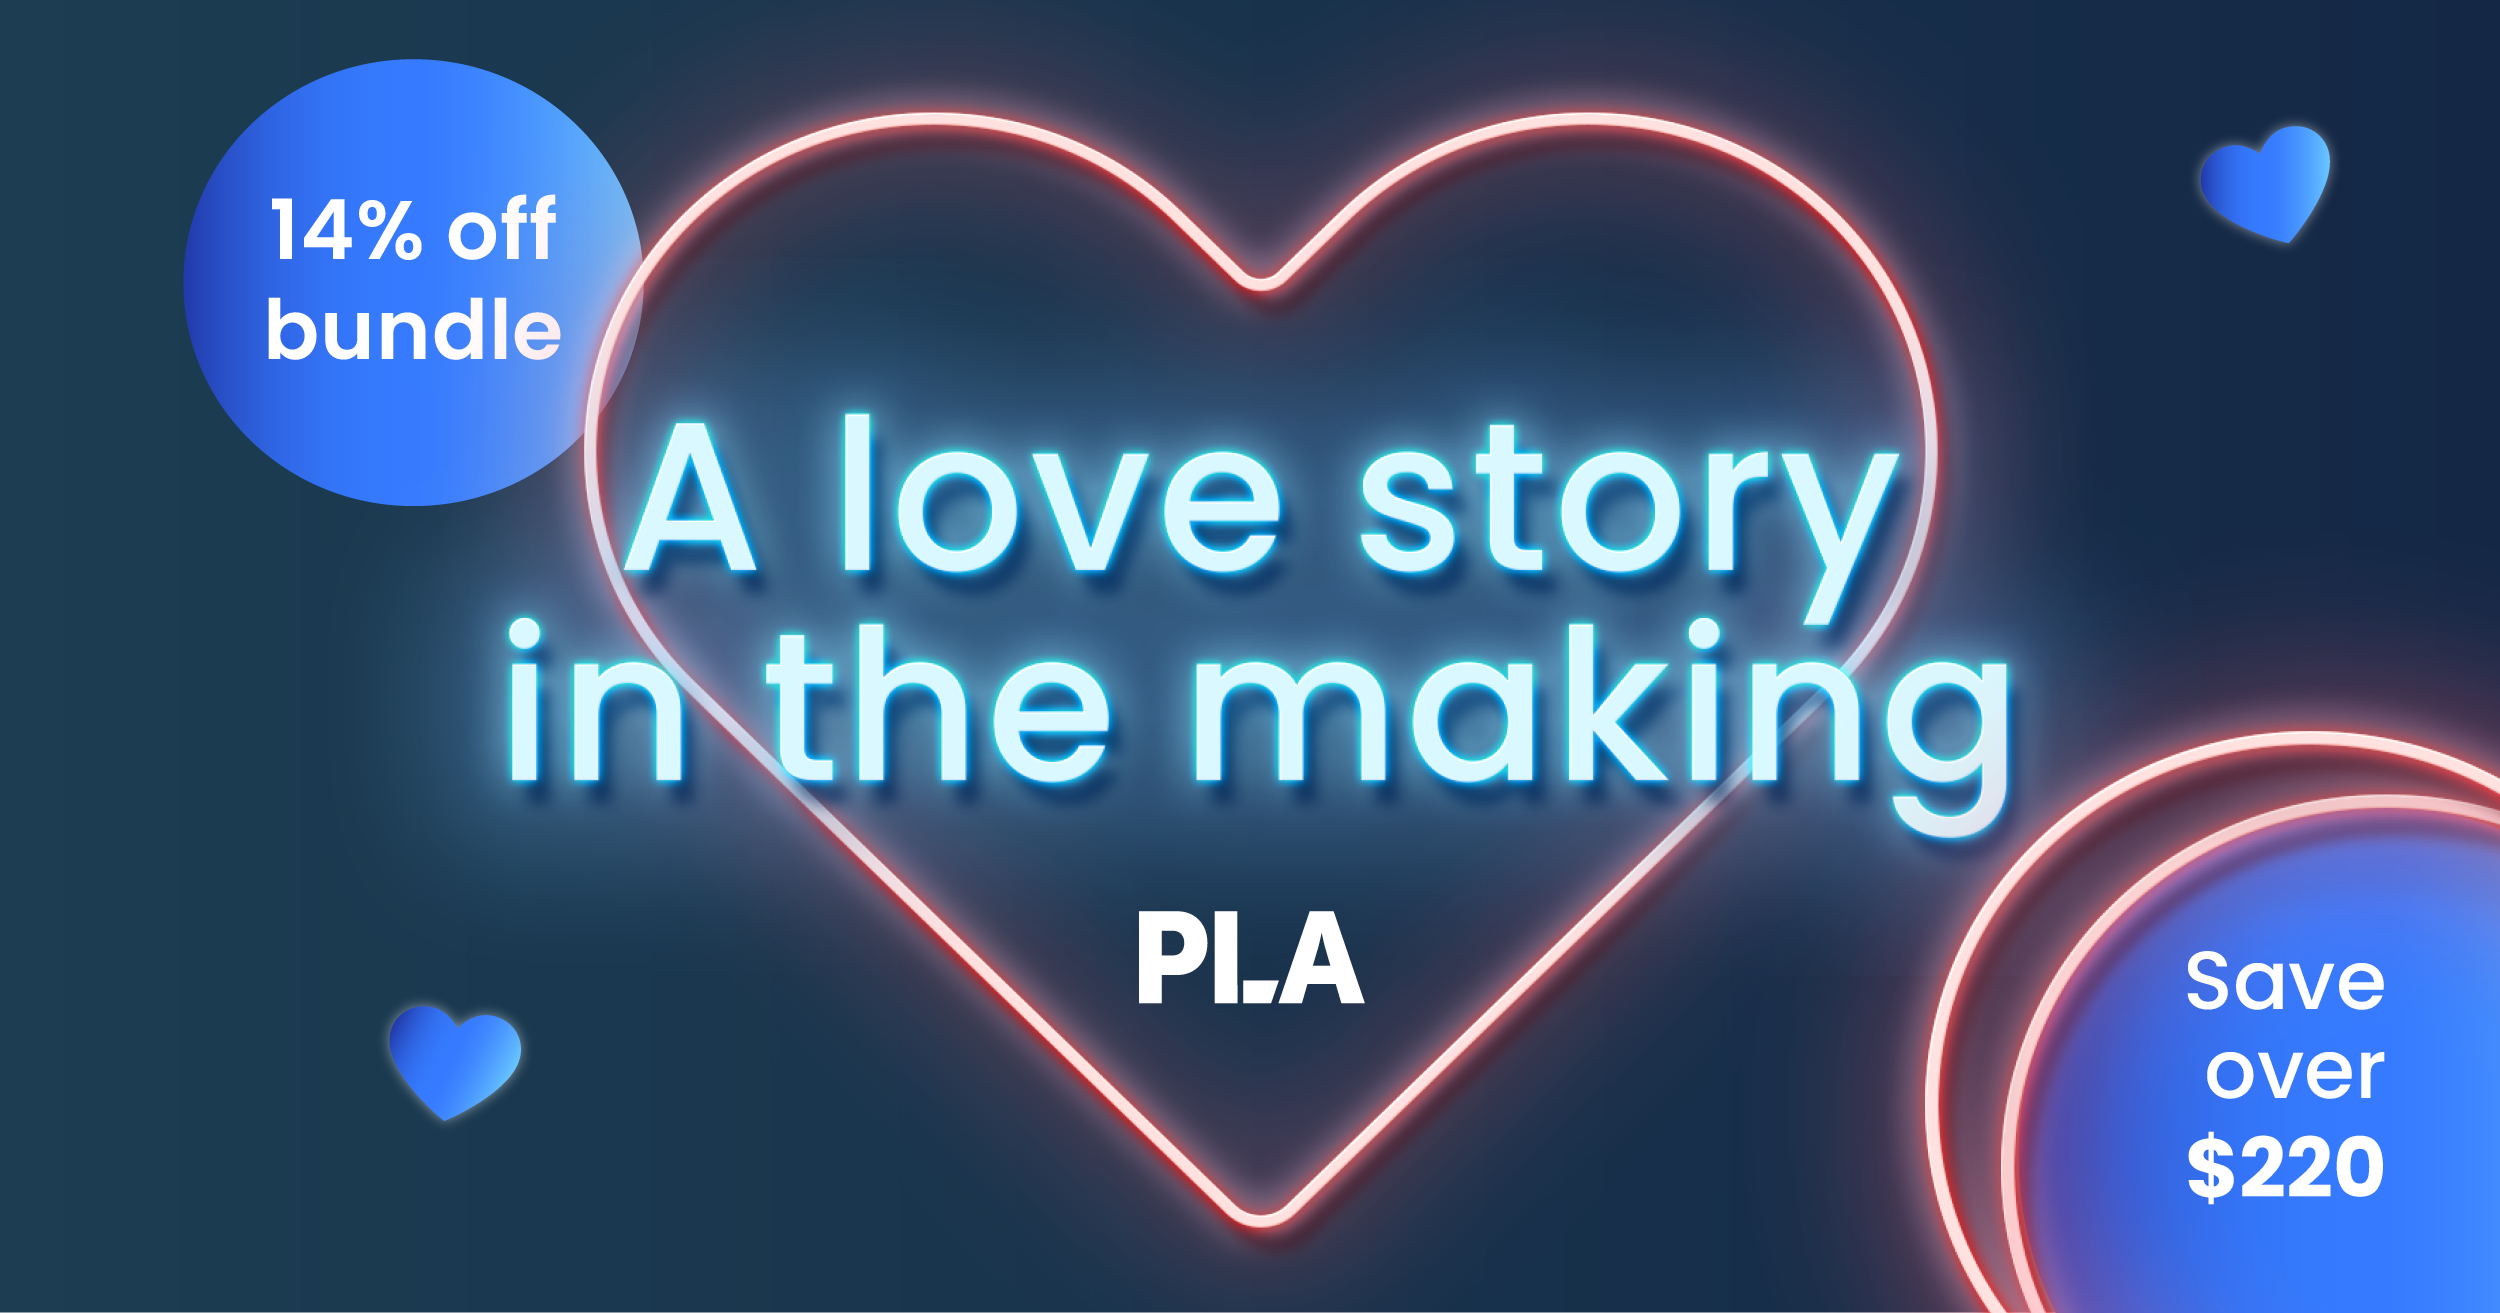 A love story in the making - 14% off bundle, save over $220